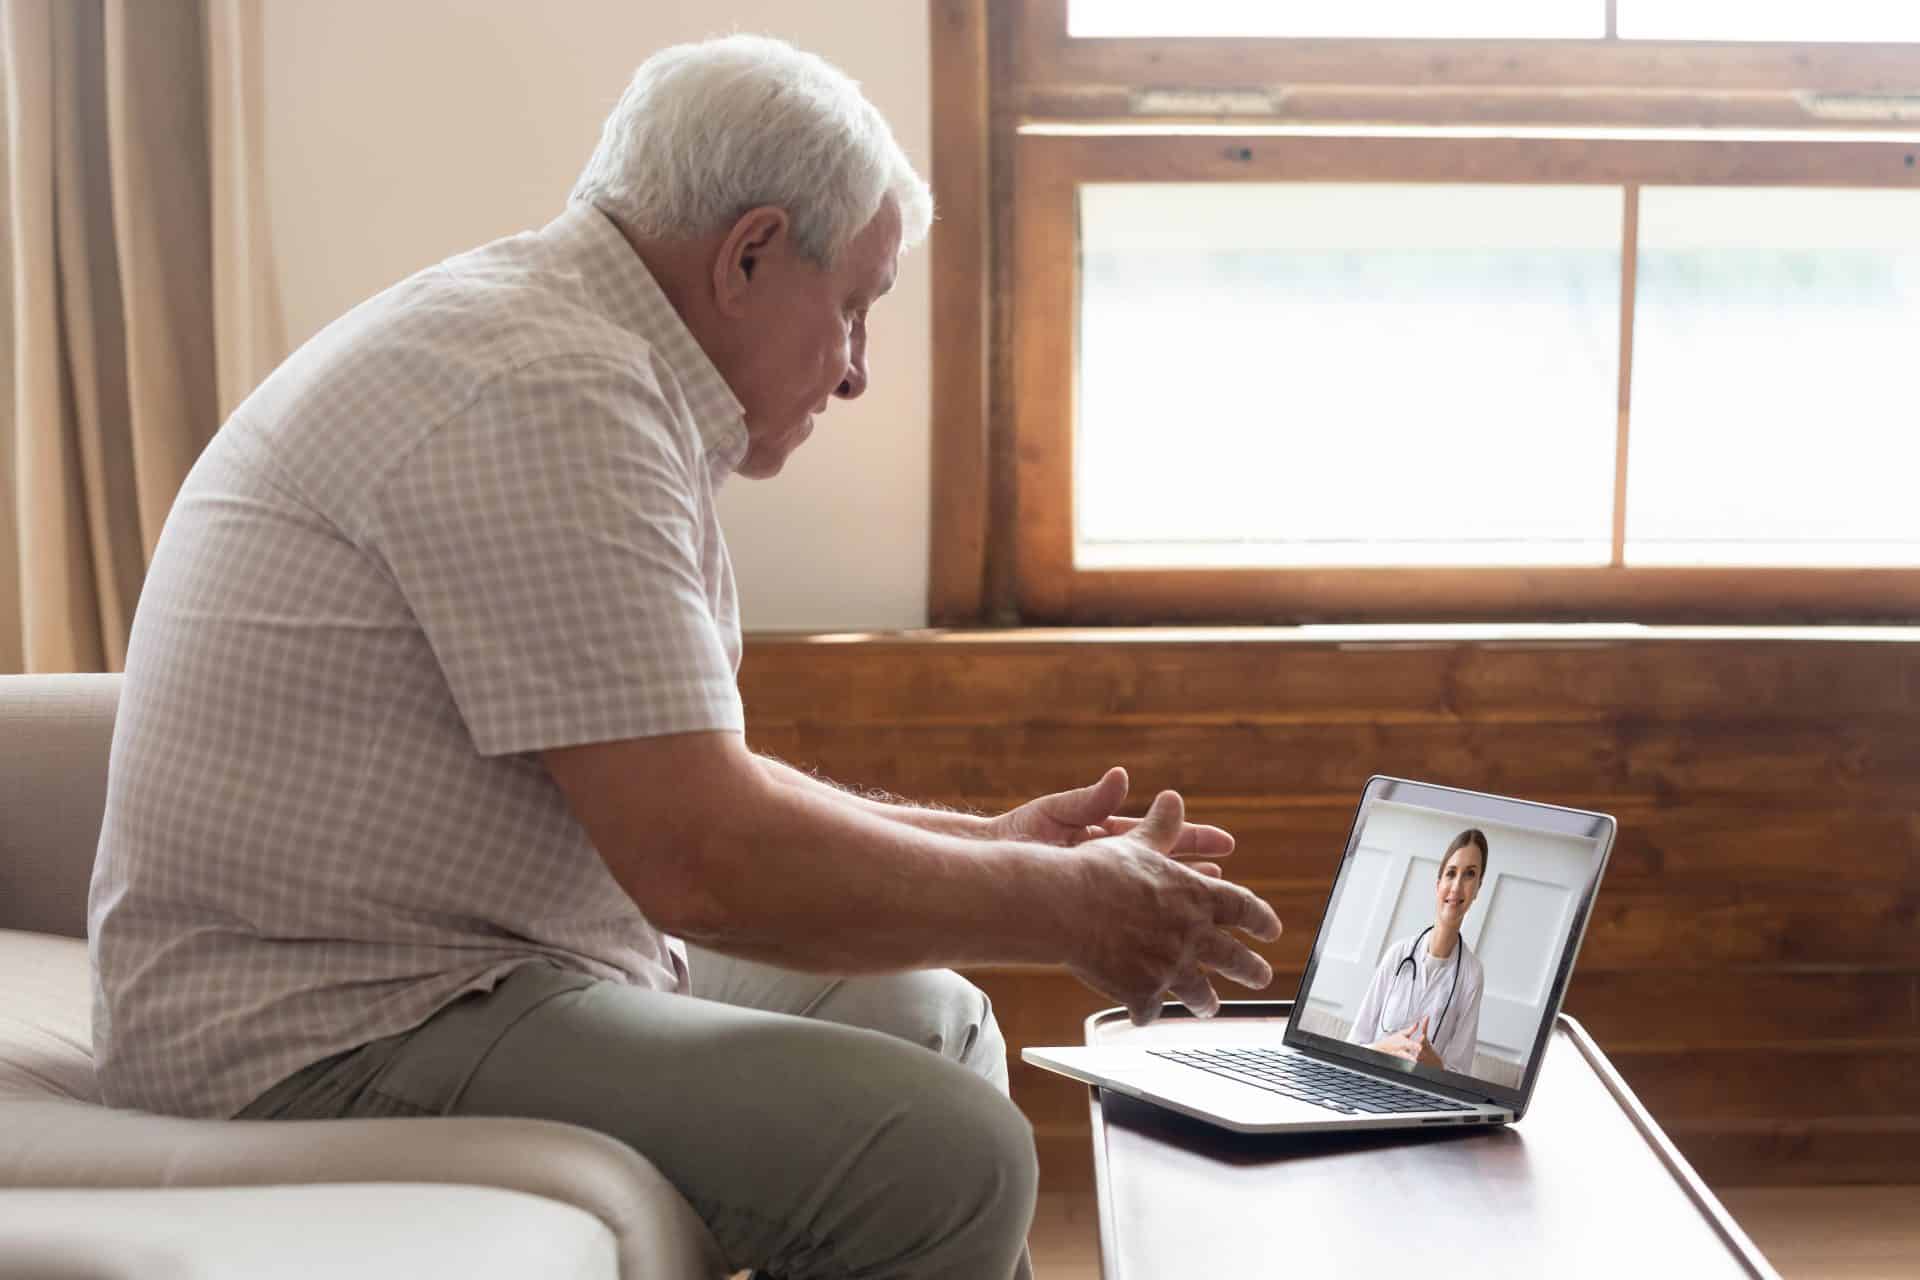 Medical Cannabis and Telemedicine: What You Need to Know